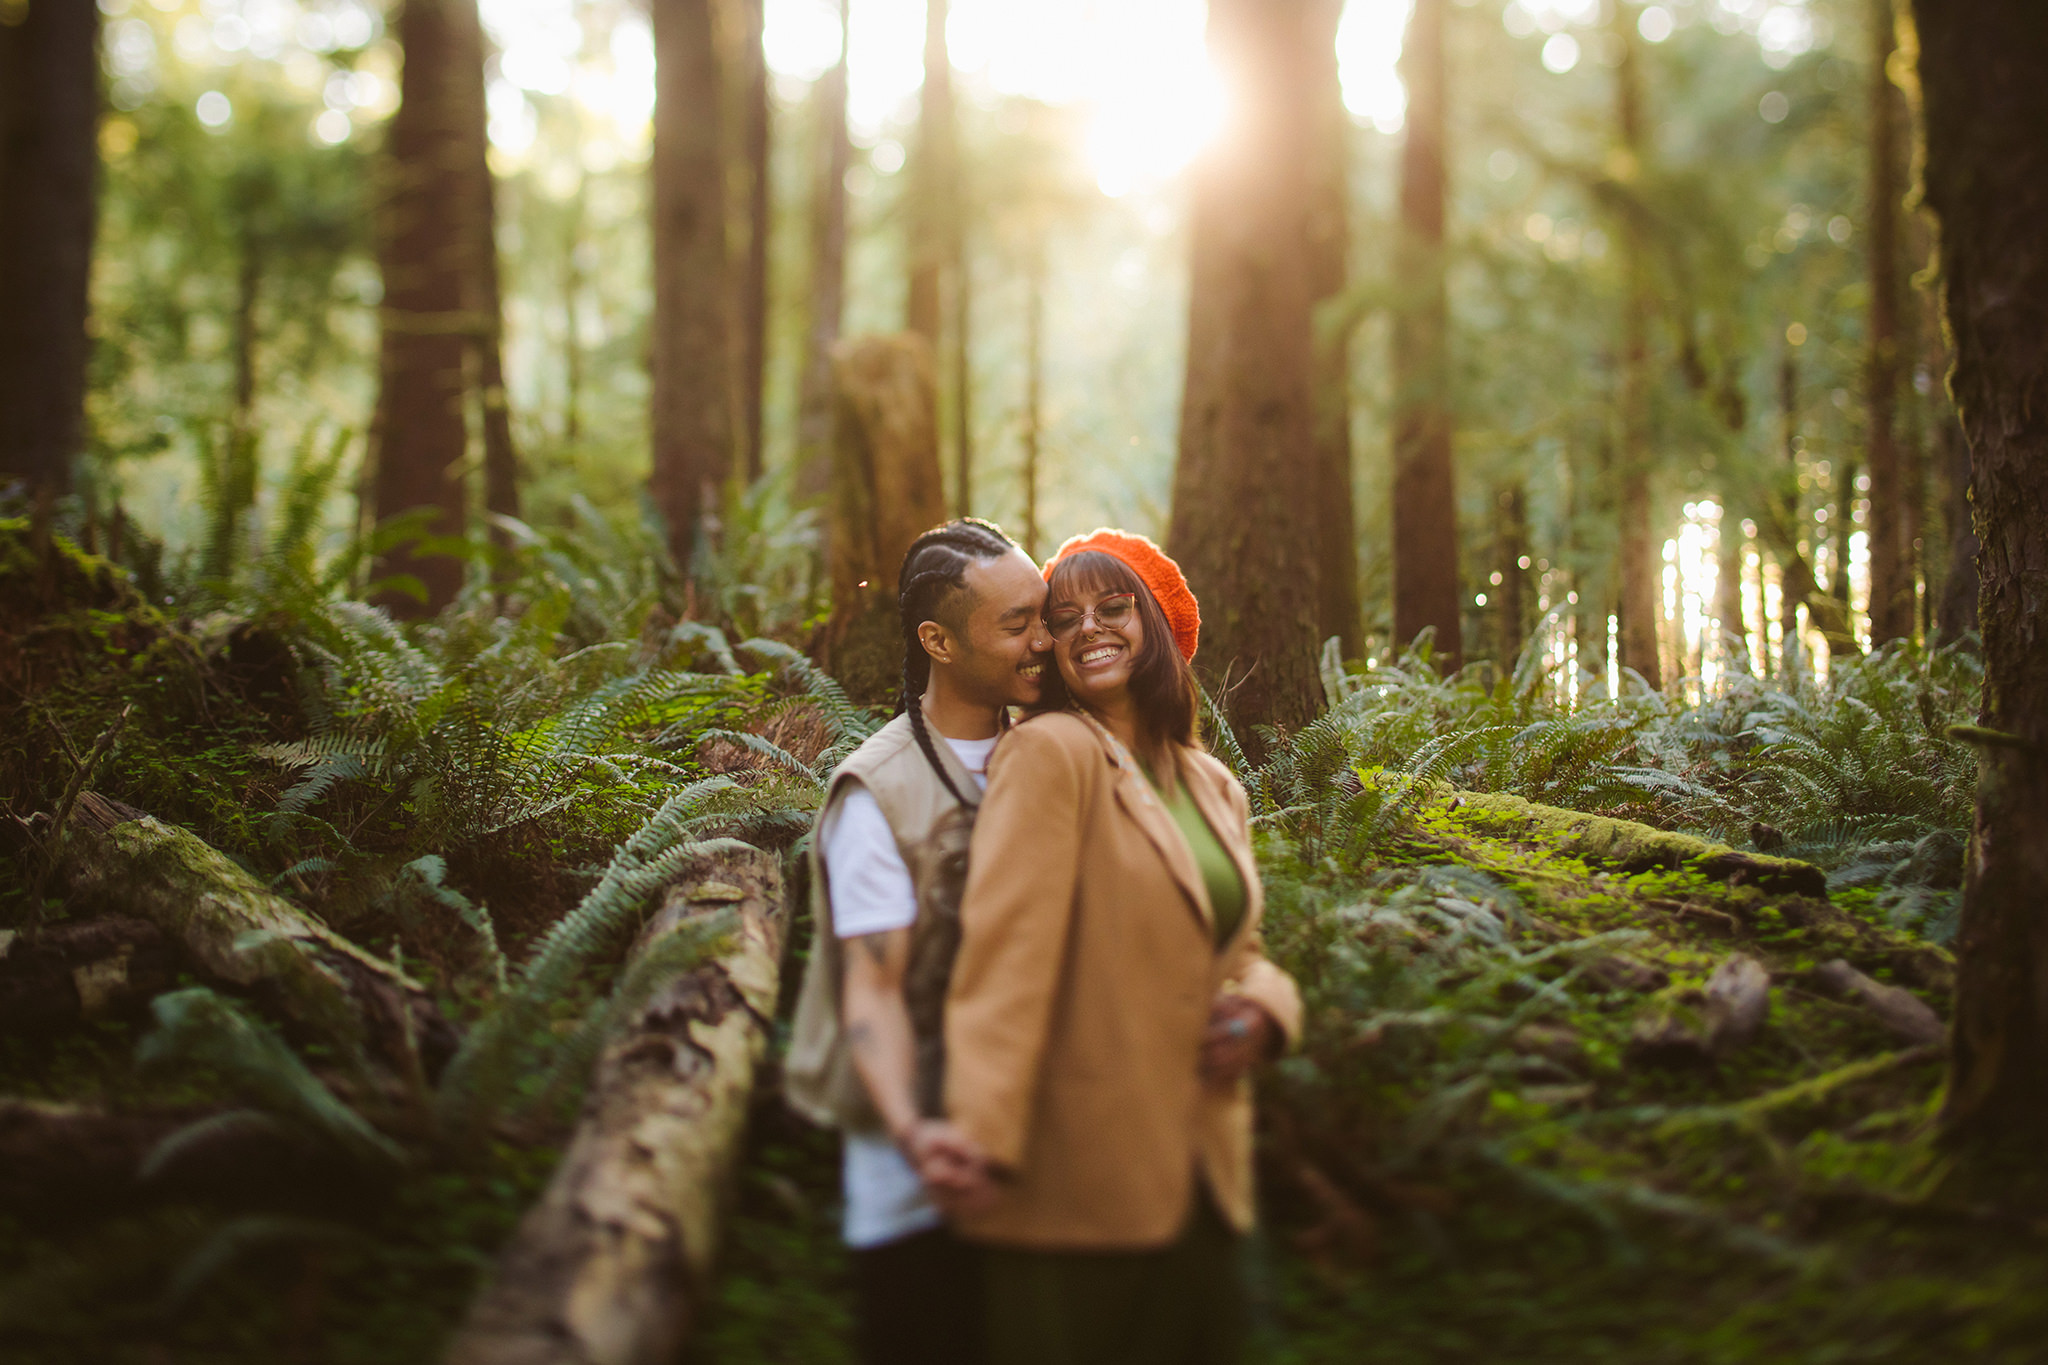 An engagement photo in the ferns at golden hour on the Oregon coast near Cannon Beach